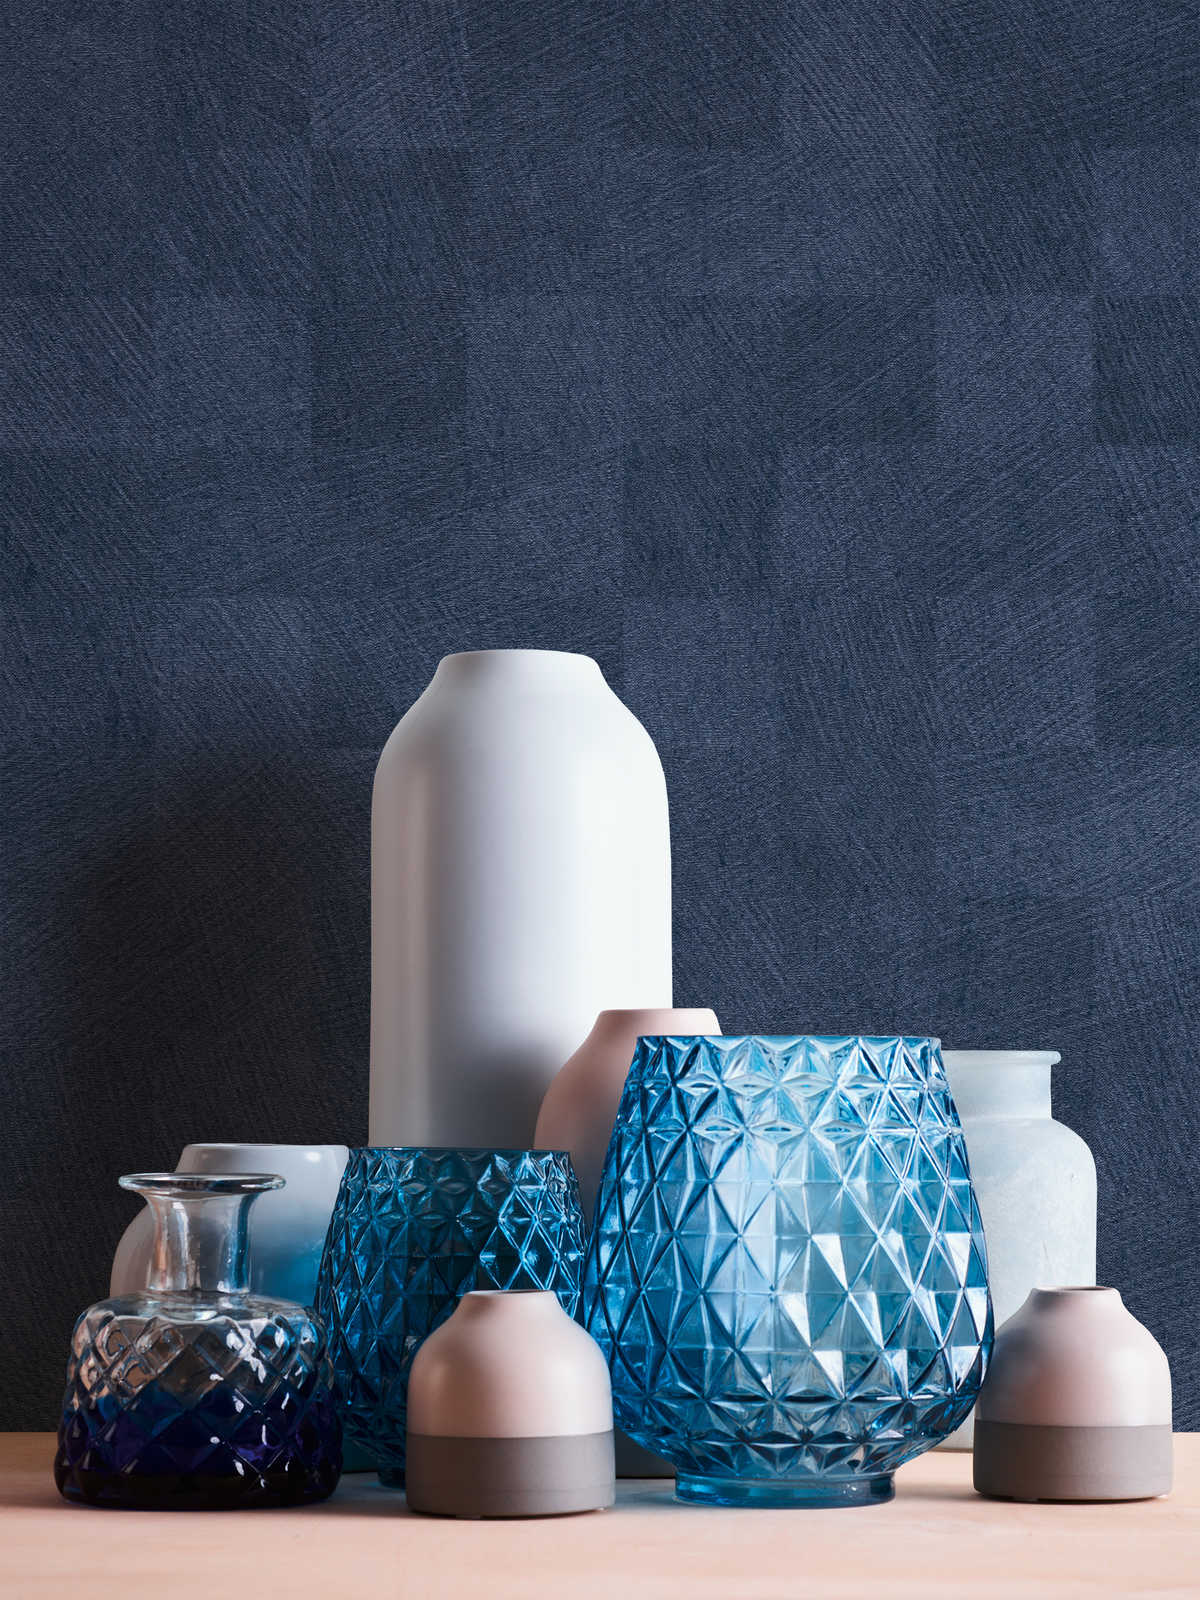             Plaid wallpaper night blue with structure & gloss effect - blue
        